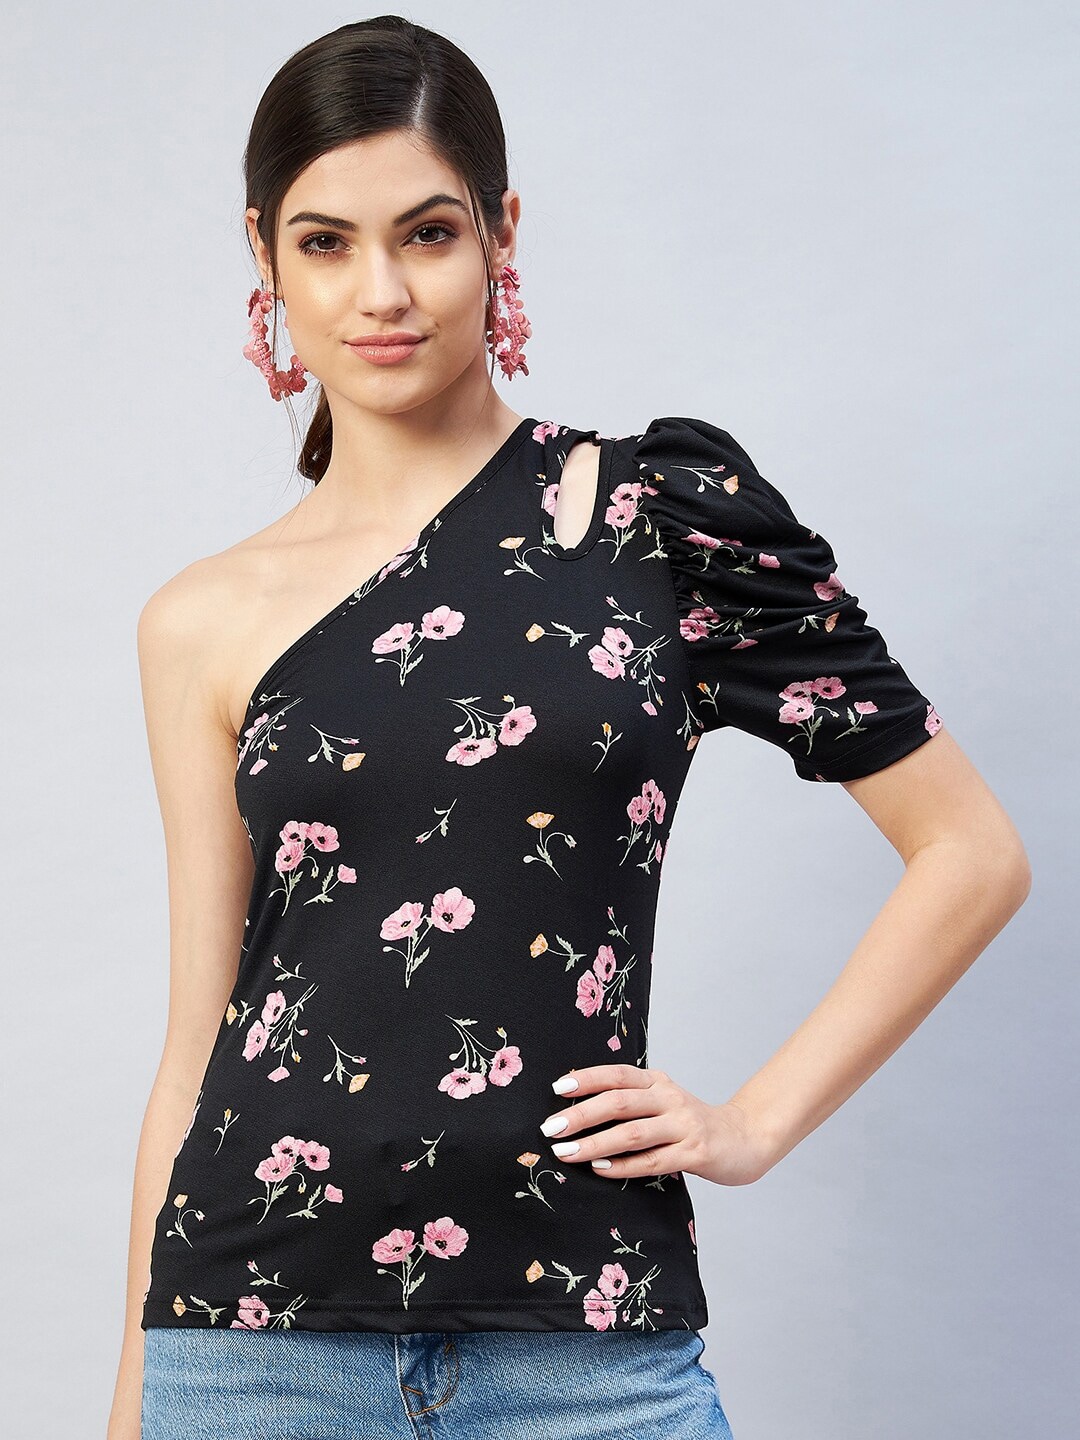 Marie Claire Black Floral Print One Shoulder Top Price in India